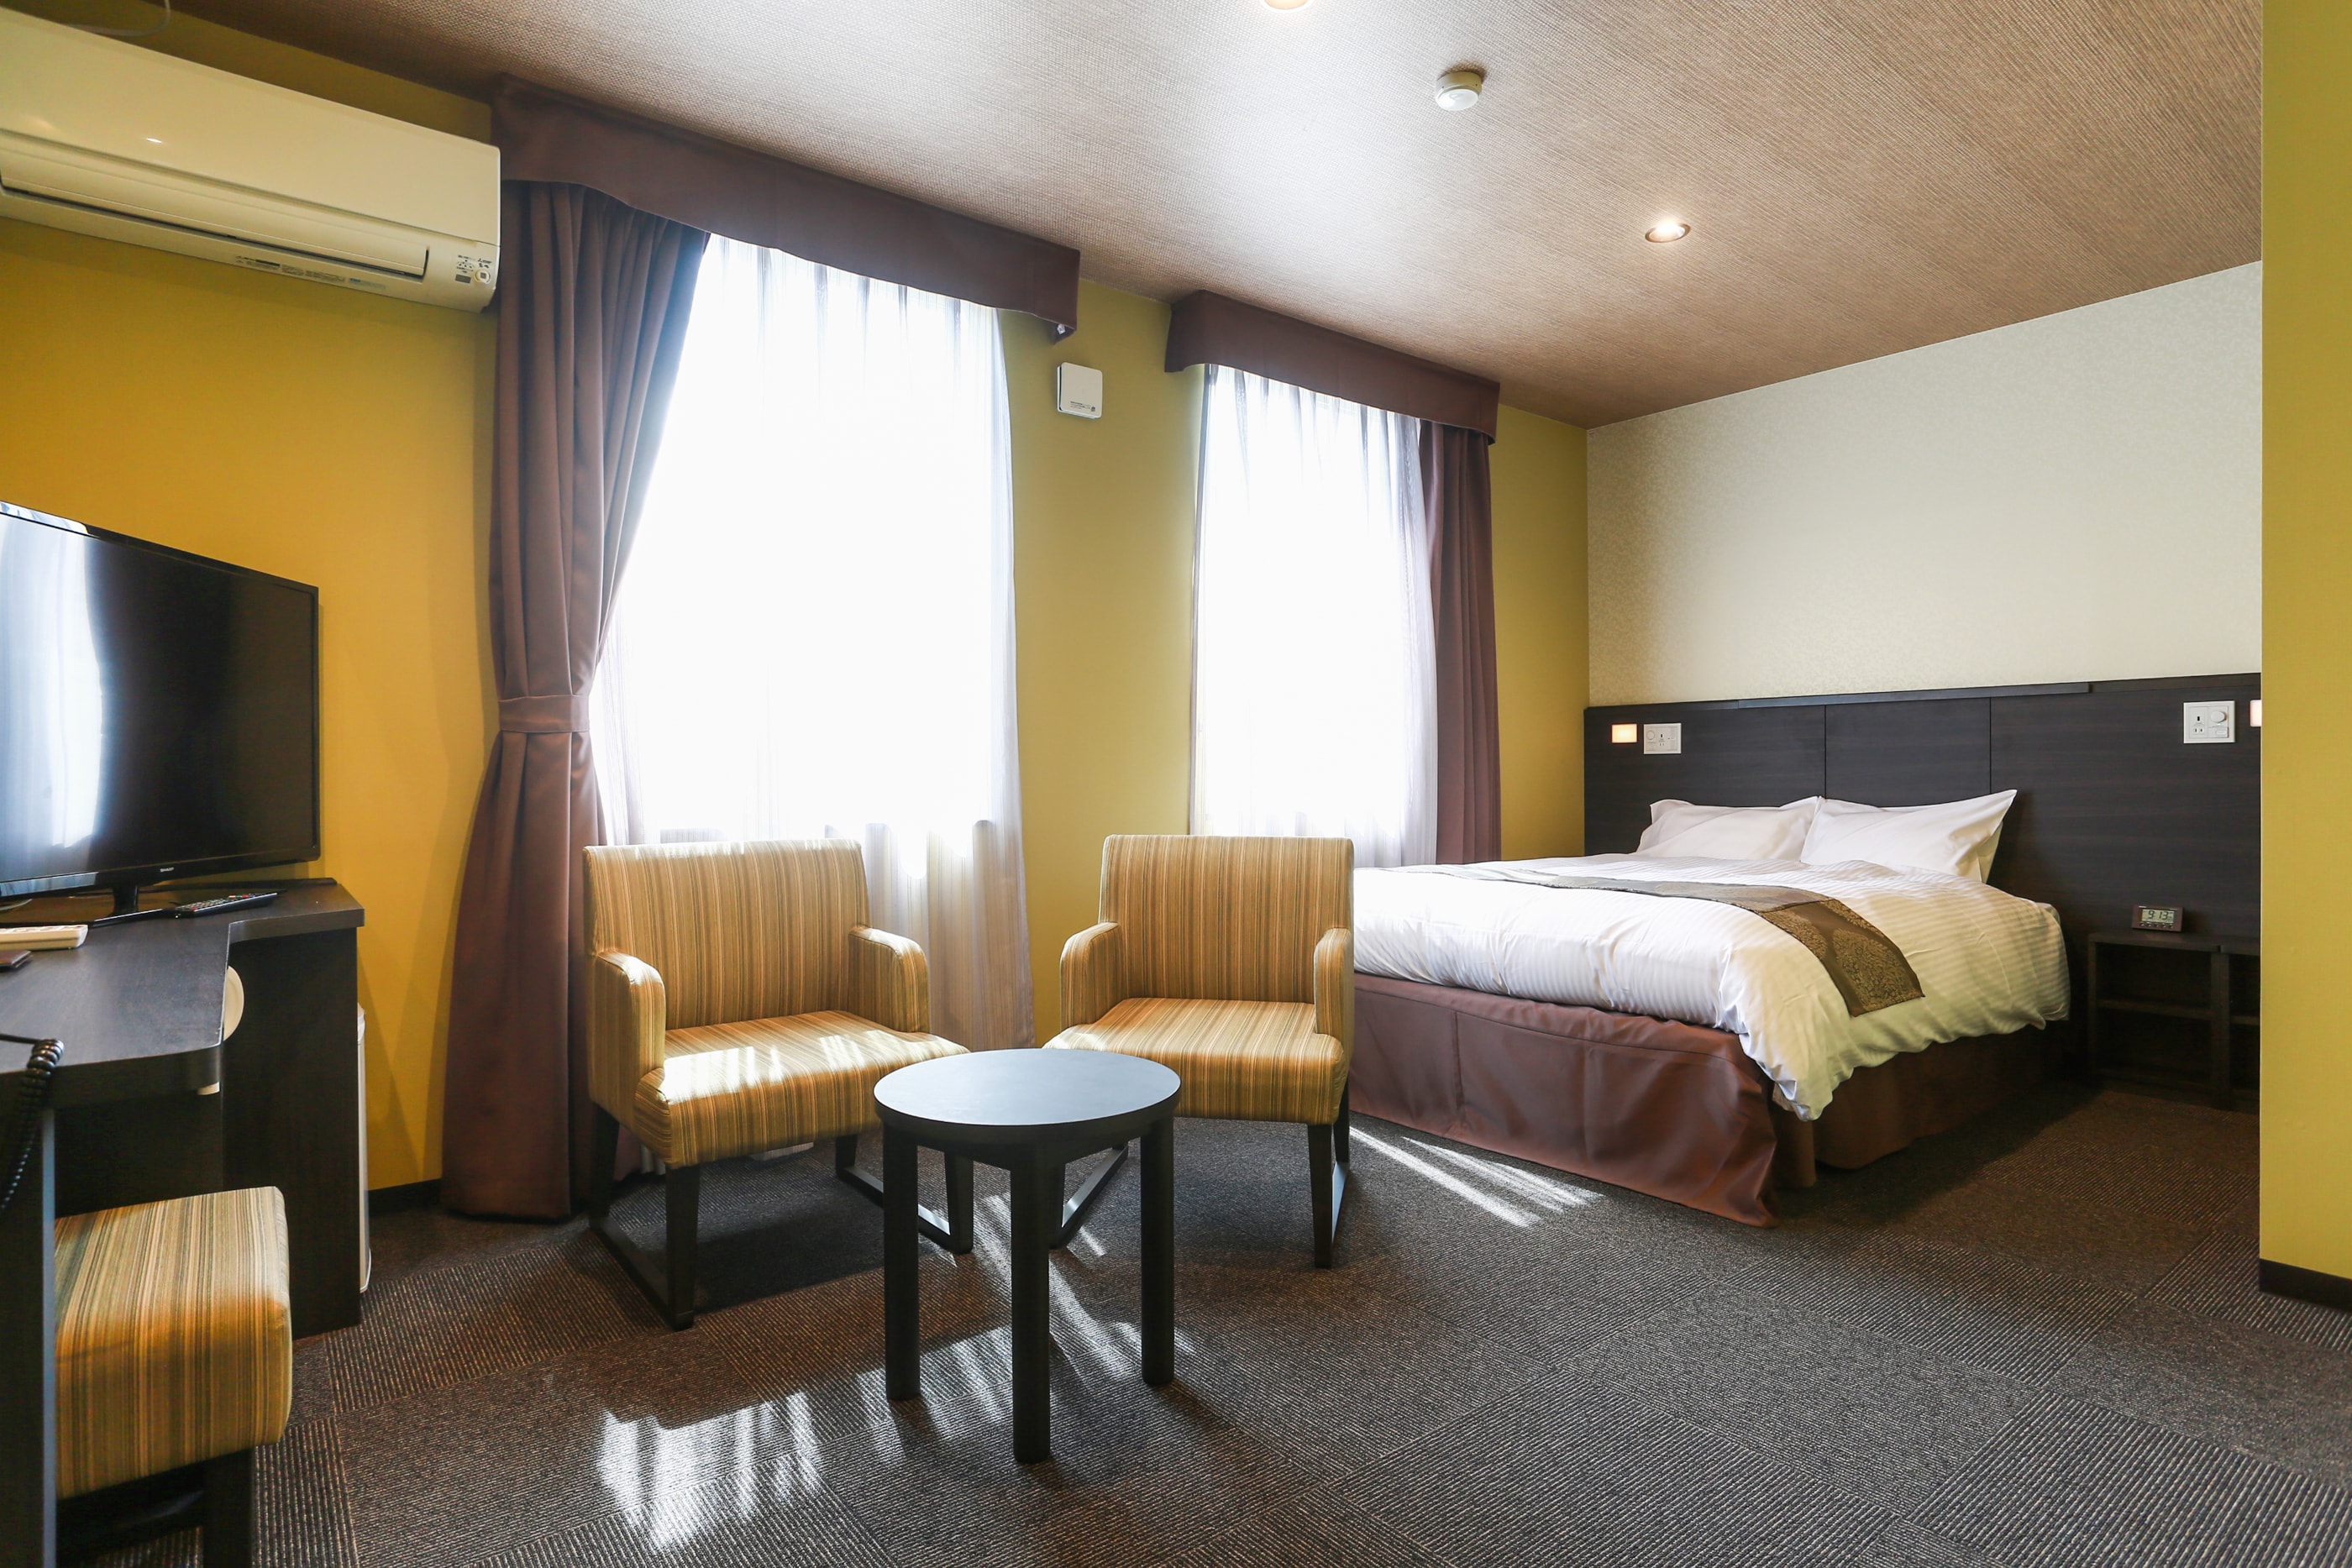 The spacious 25 m2 room is barrier-free and can be used comfortably by elderly guests.